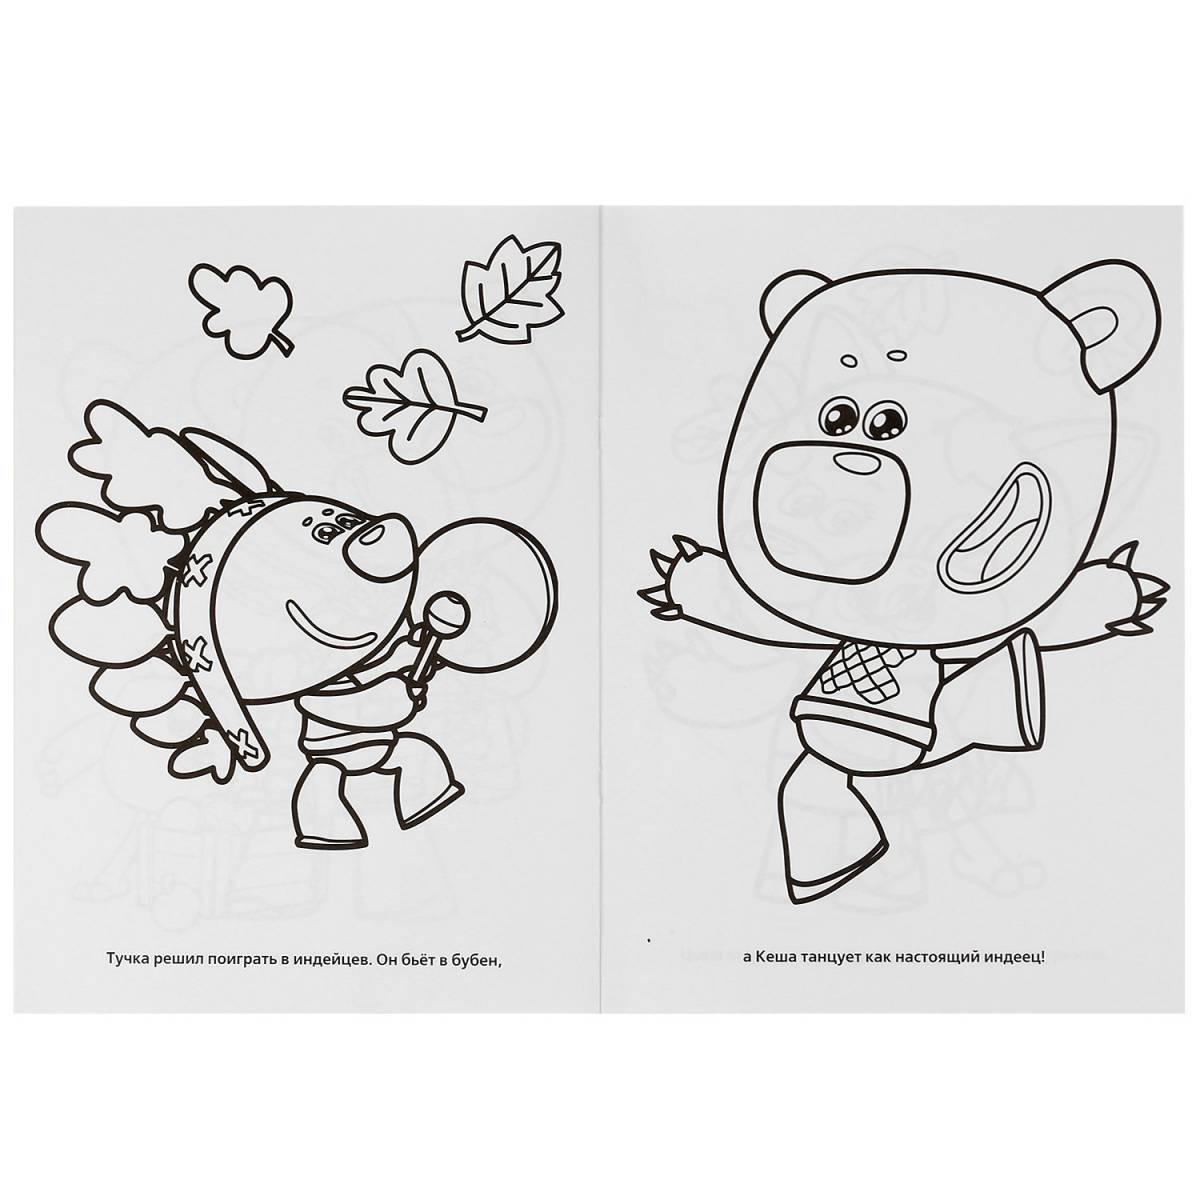 Creative coloring page turn on coloring with facial expressions